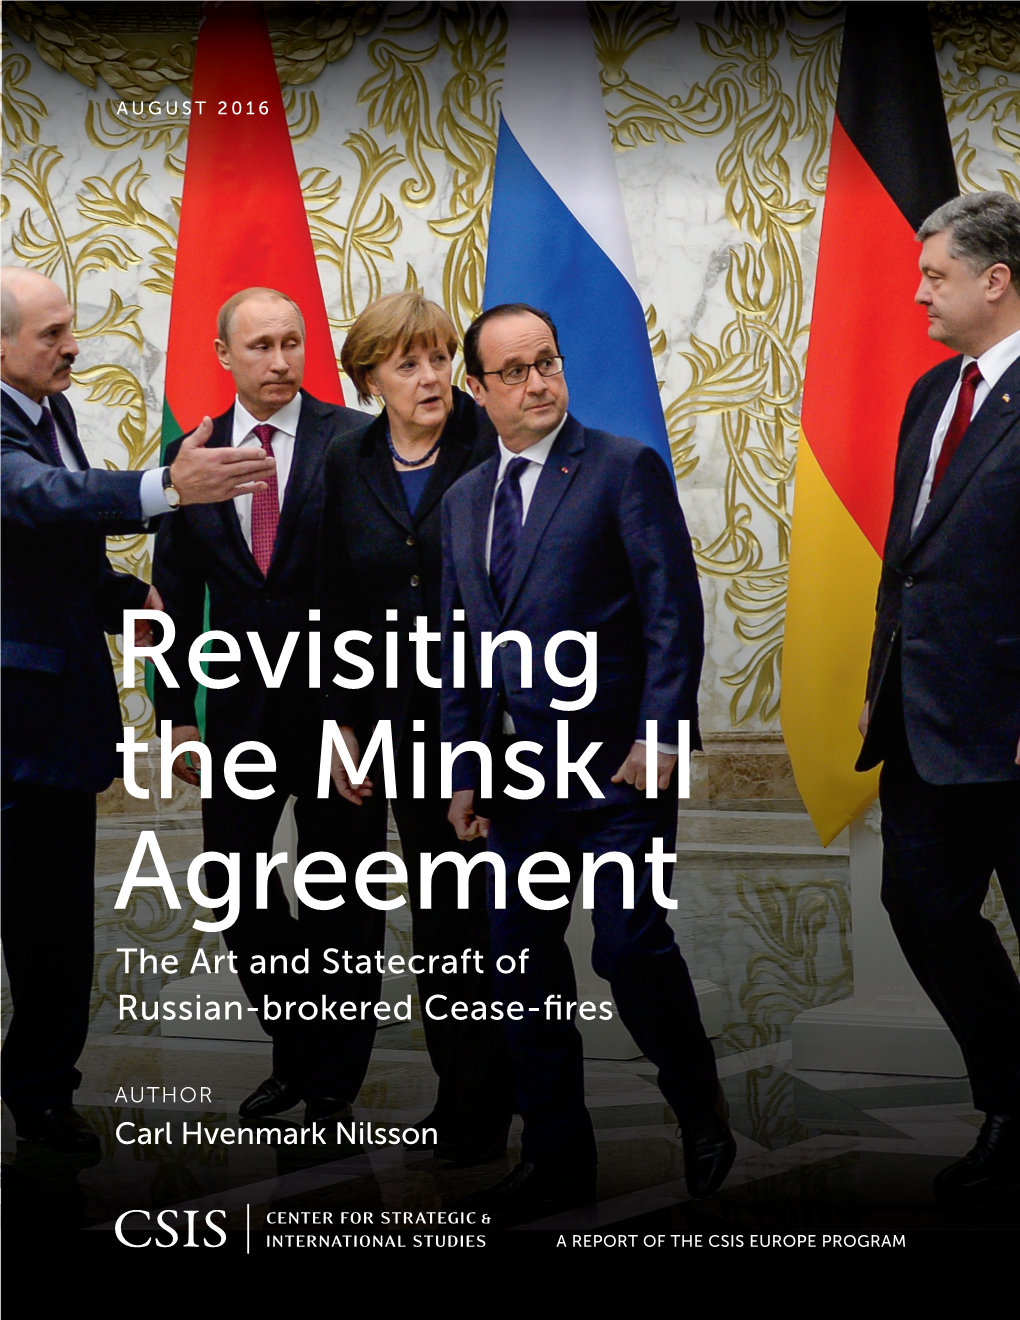 Revisiting the Minsk II Agreement the Art and Statecraft of Russian-Brokered Cease-ﬁ Res